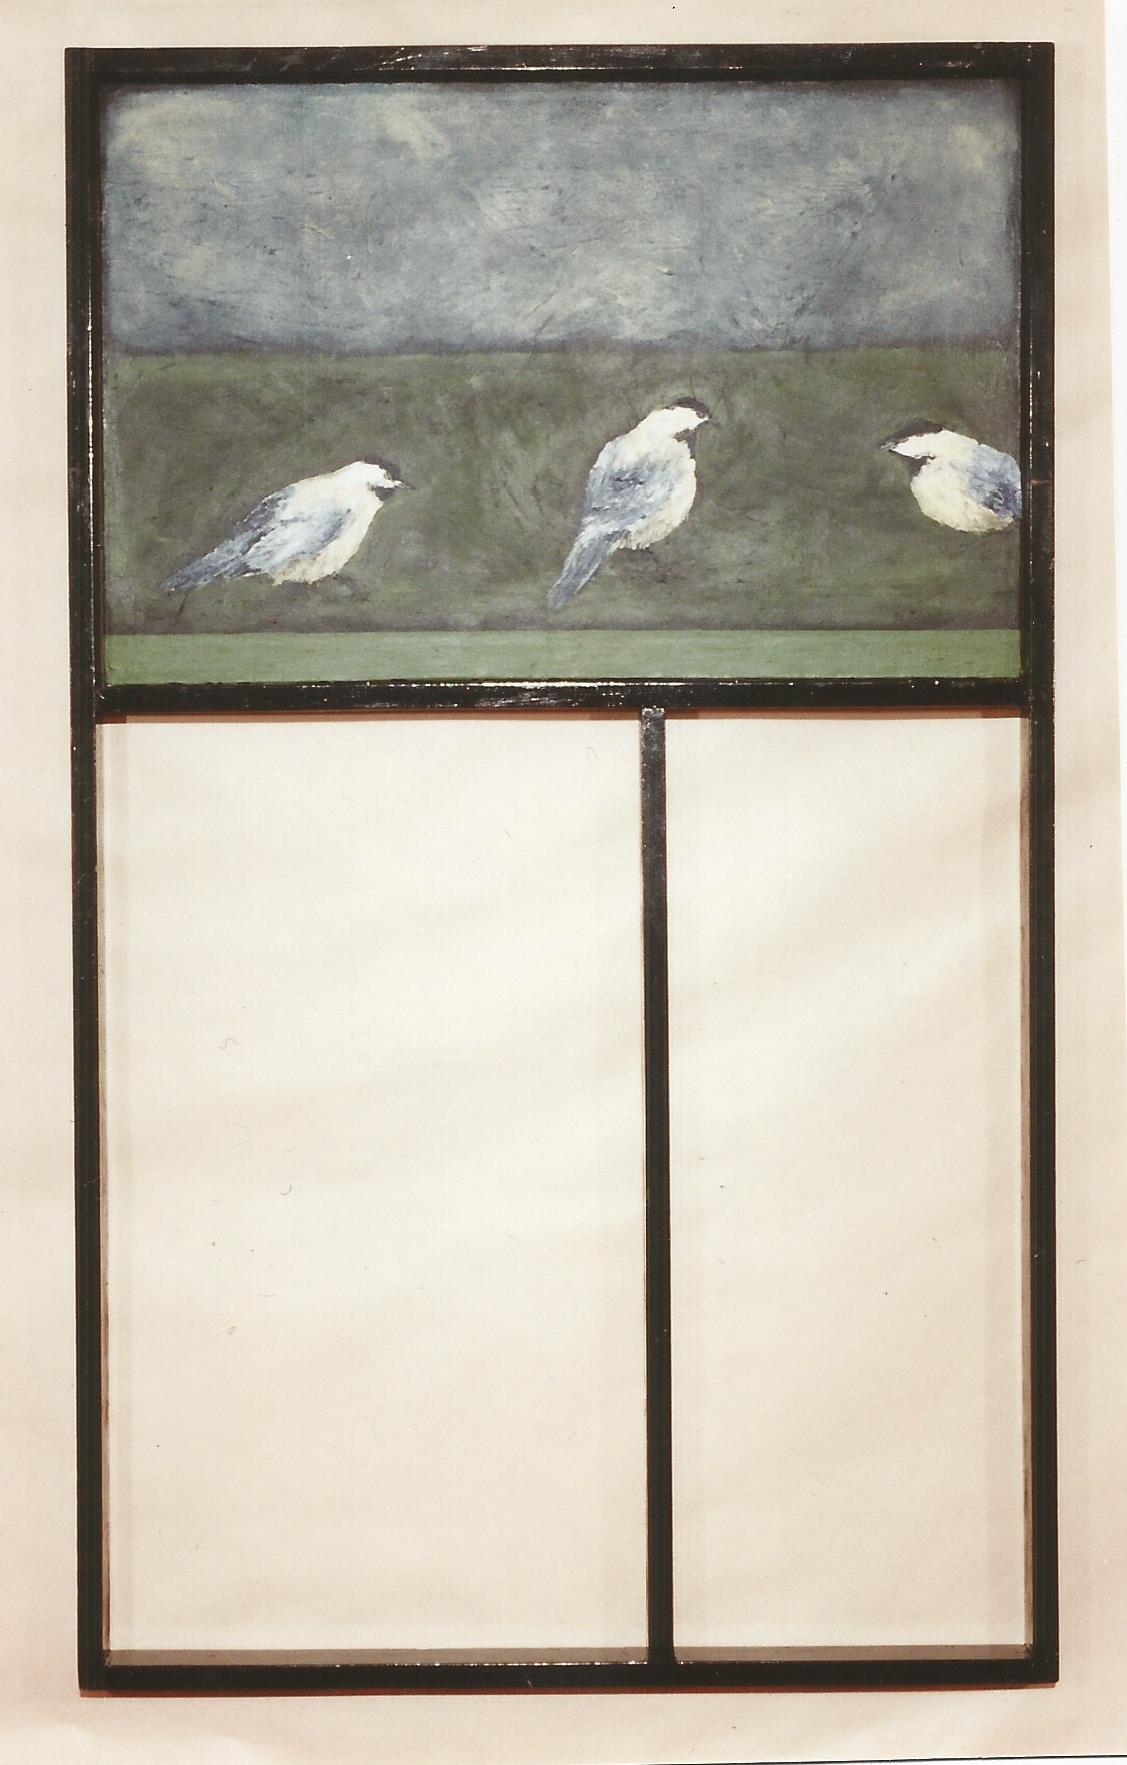 A painting of three chick-a-dees on the grass with a stormy sky in the background. The painting of the birds is set in a frame that has two empty framed areas below.